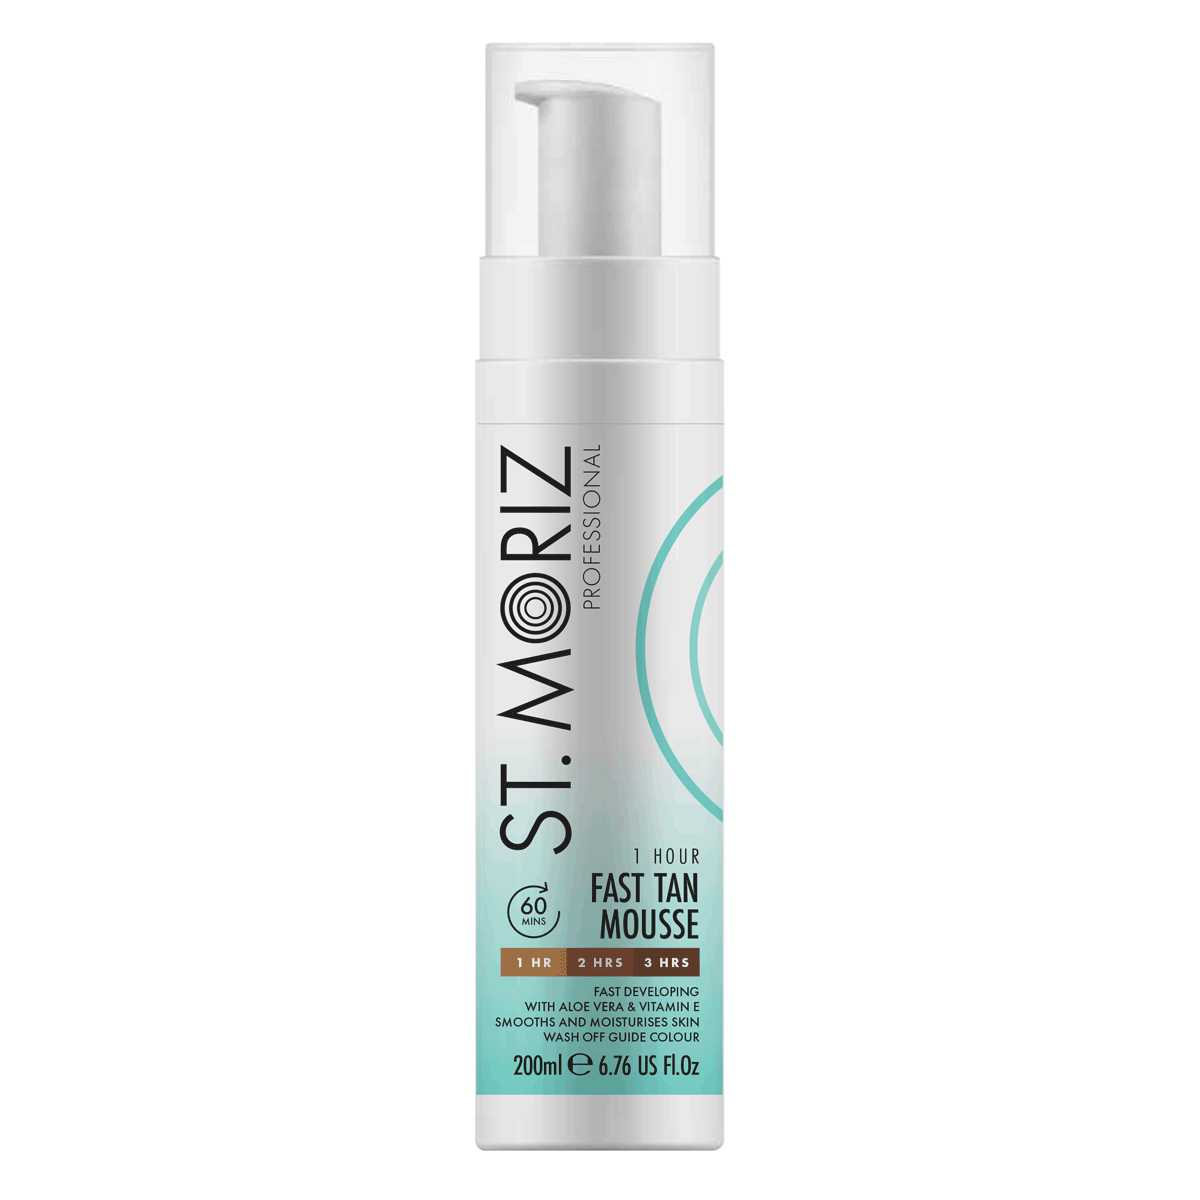 St. Moriz Professional - Express - Schnell reagierendes Selbstbräunungs-Mousse 200ml